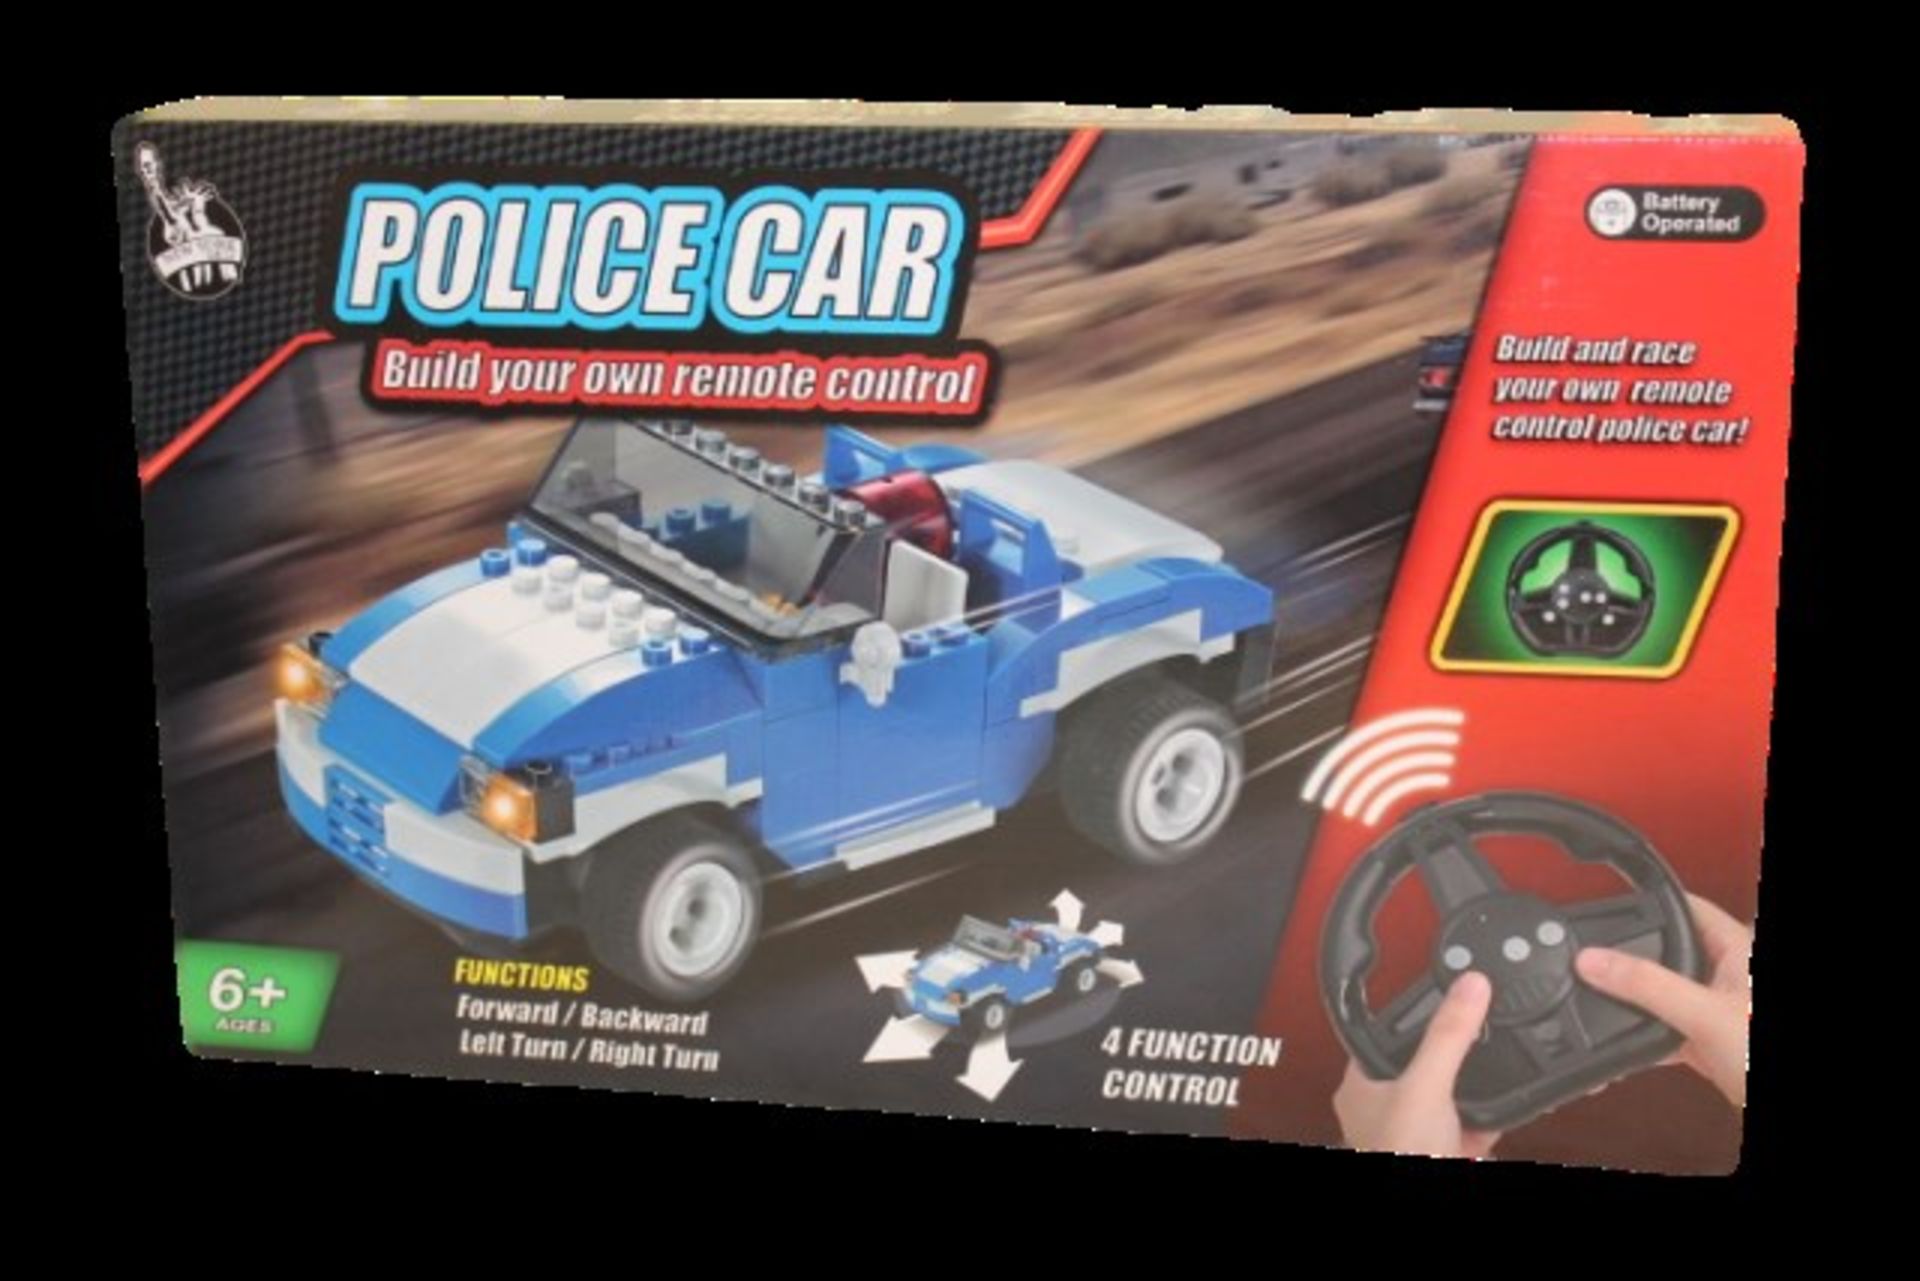 V Brand New Radio Controlled Build your own Police Car Full function r/c Matches Lego RRP ú49.99 X 2